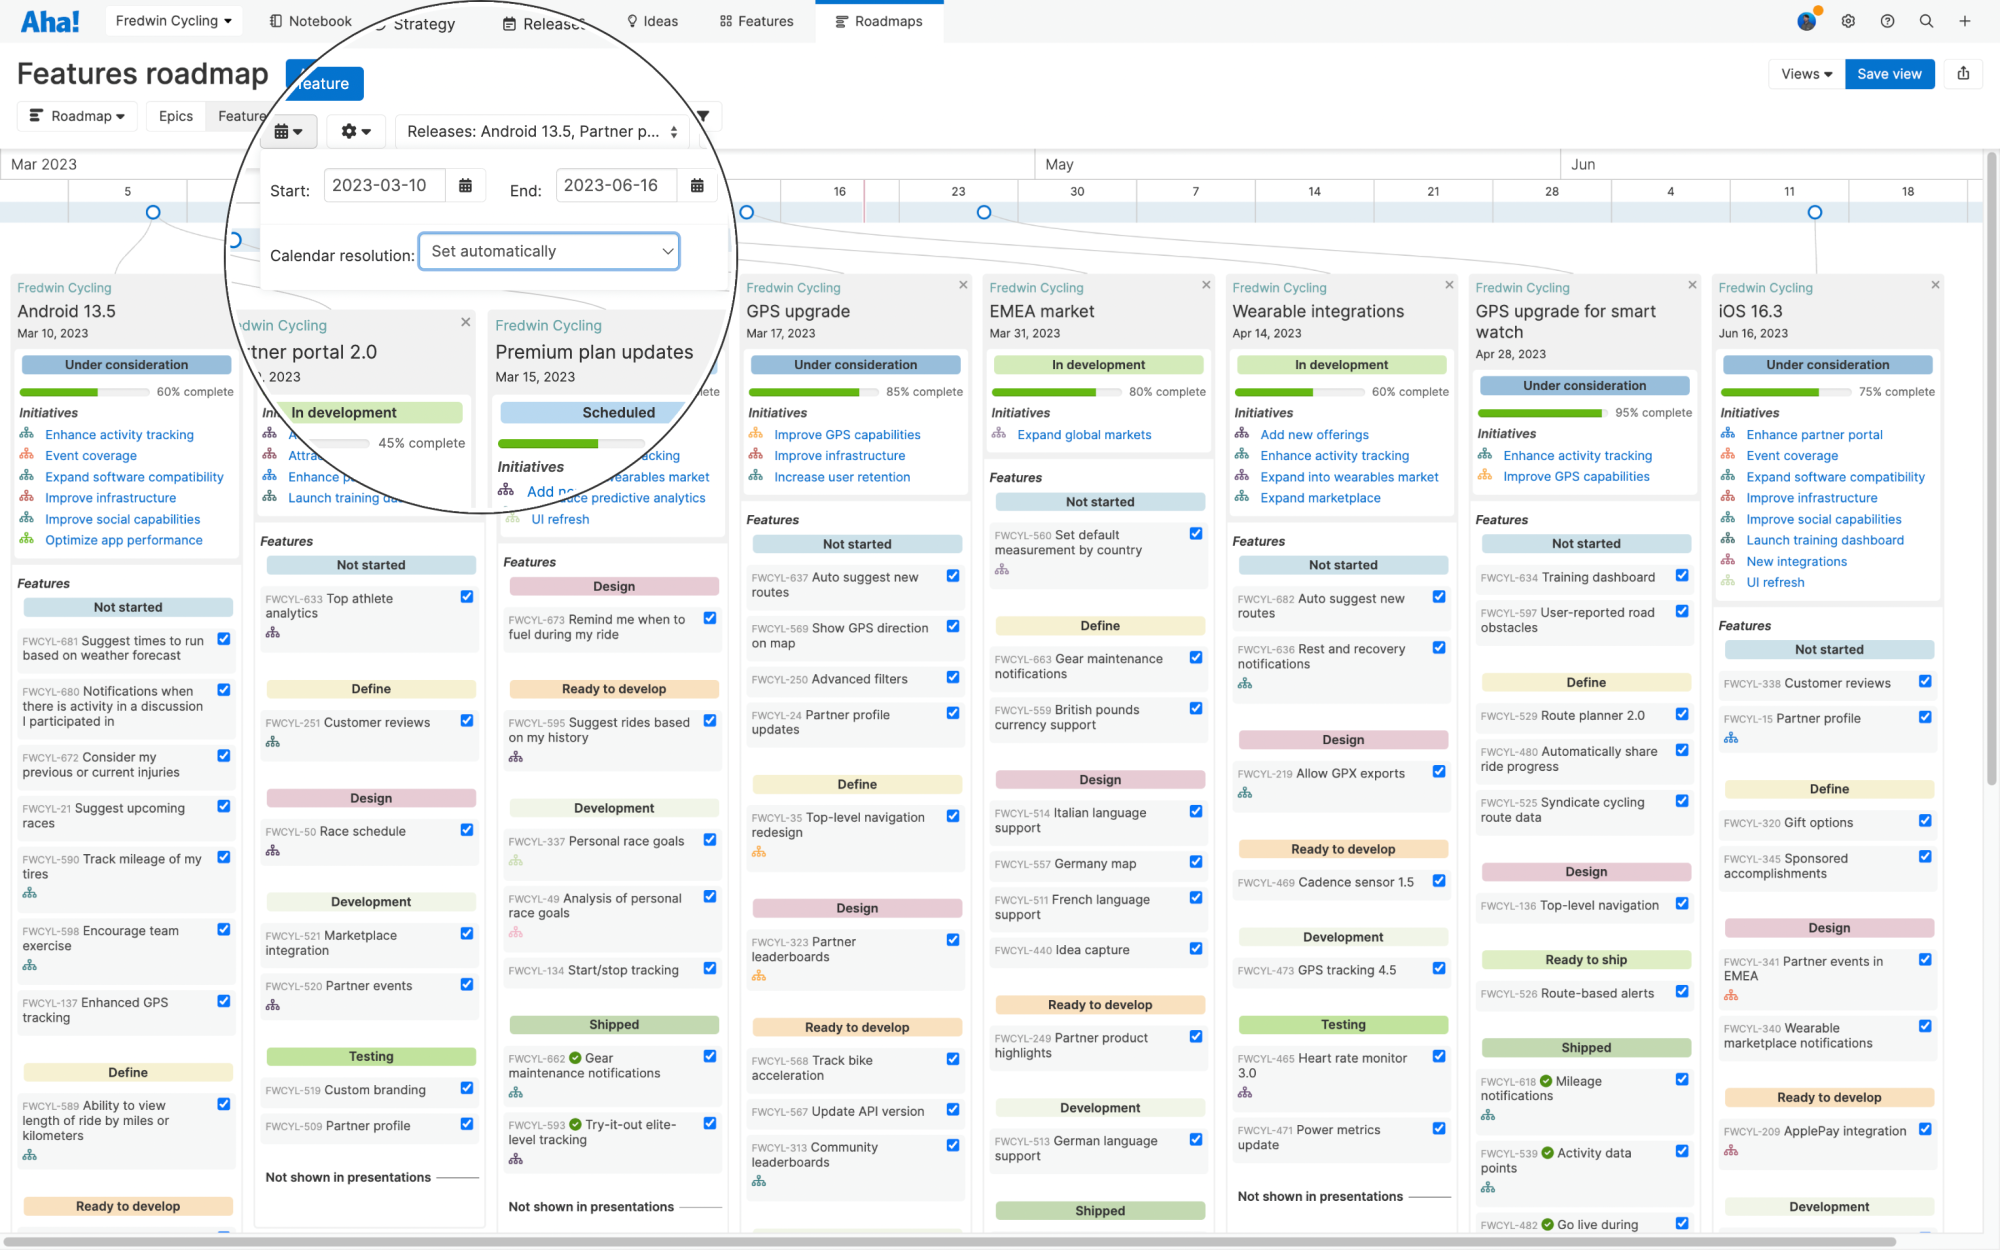 Features roadmap with calendar view dropdown highlighted.